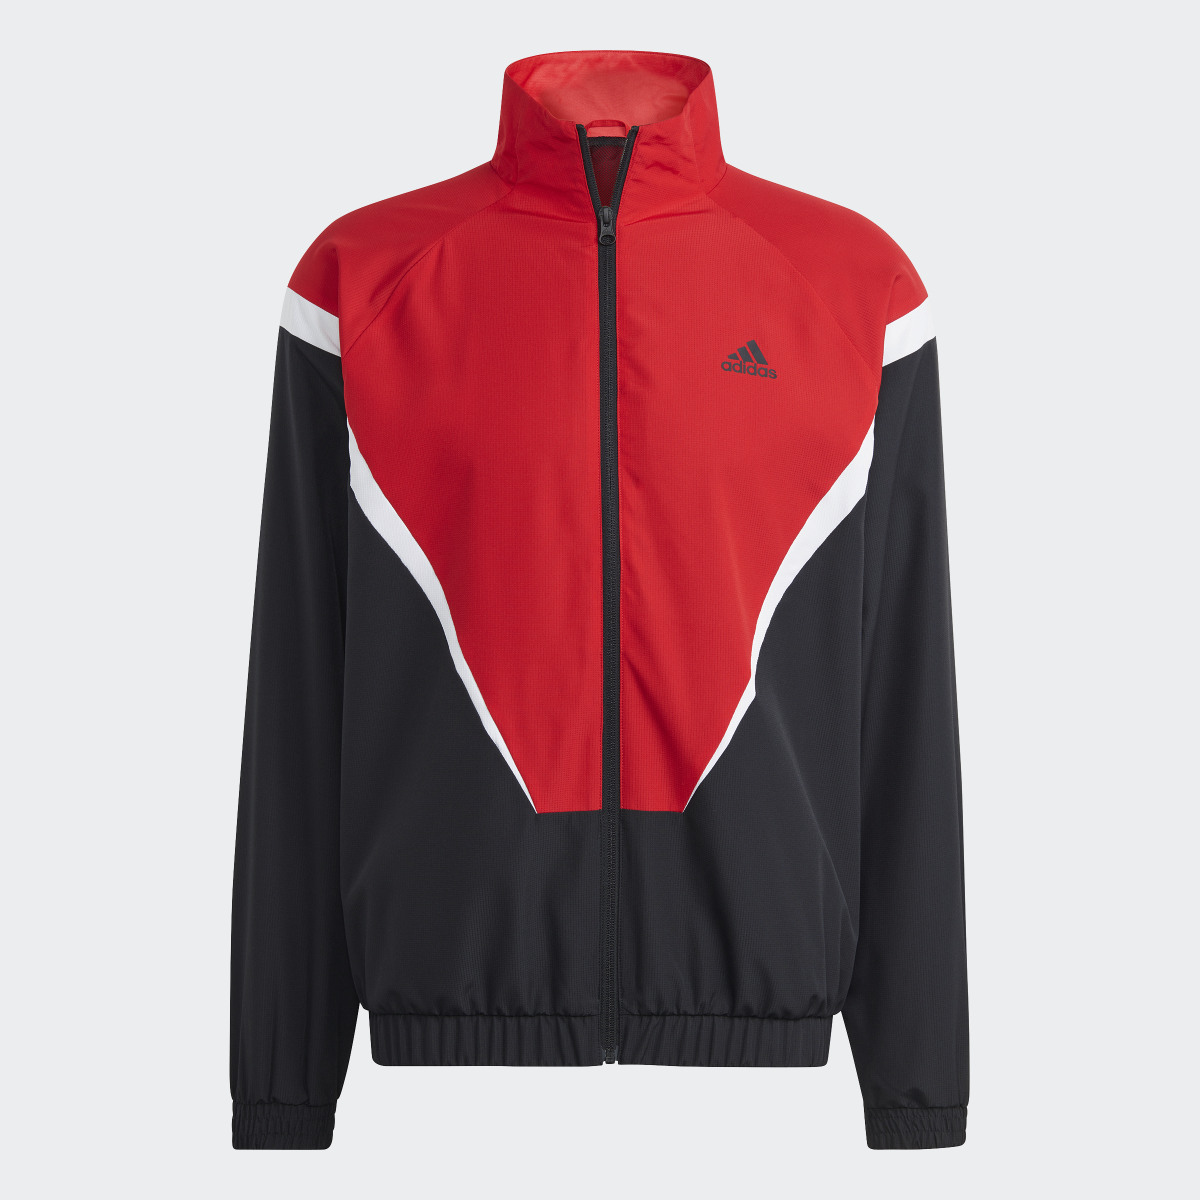 Adidas Sportswear Woven Non-Hooded Track Suit. 6